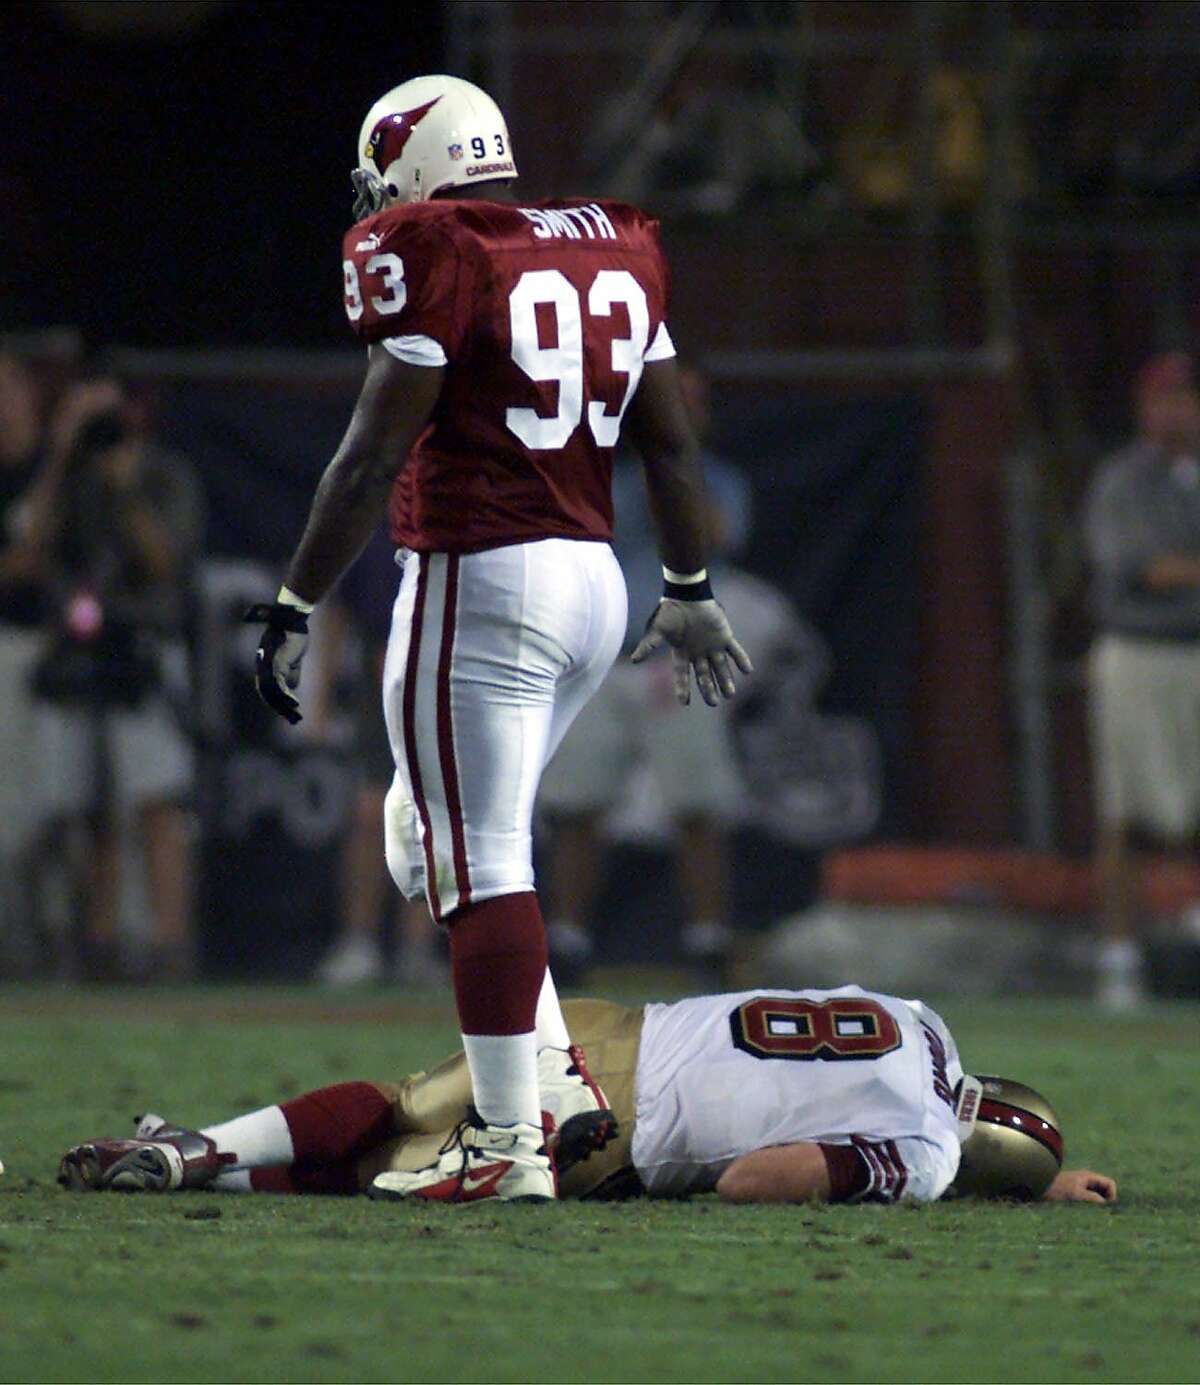 49ERSYOUNG1 -C-27SEP99-SP-MJM Steve Young goes down injured with a concussion, at the end of the 1st half. Arizona Cardinals #93 Mark Smith stood over a motionless Steve Young. CHRONICLE PHOTO BY MICHAEL MALONEY, ALSO RAN 6/13/2000 Ran on: 09-10-2009 Steve Young's career ended after he had a concussion in a game at Arizona.